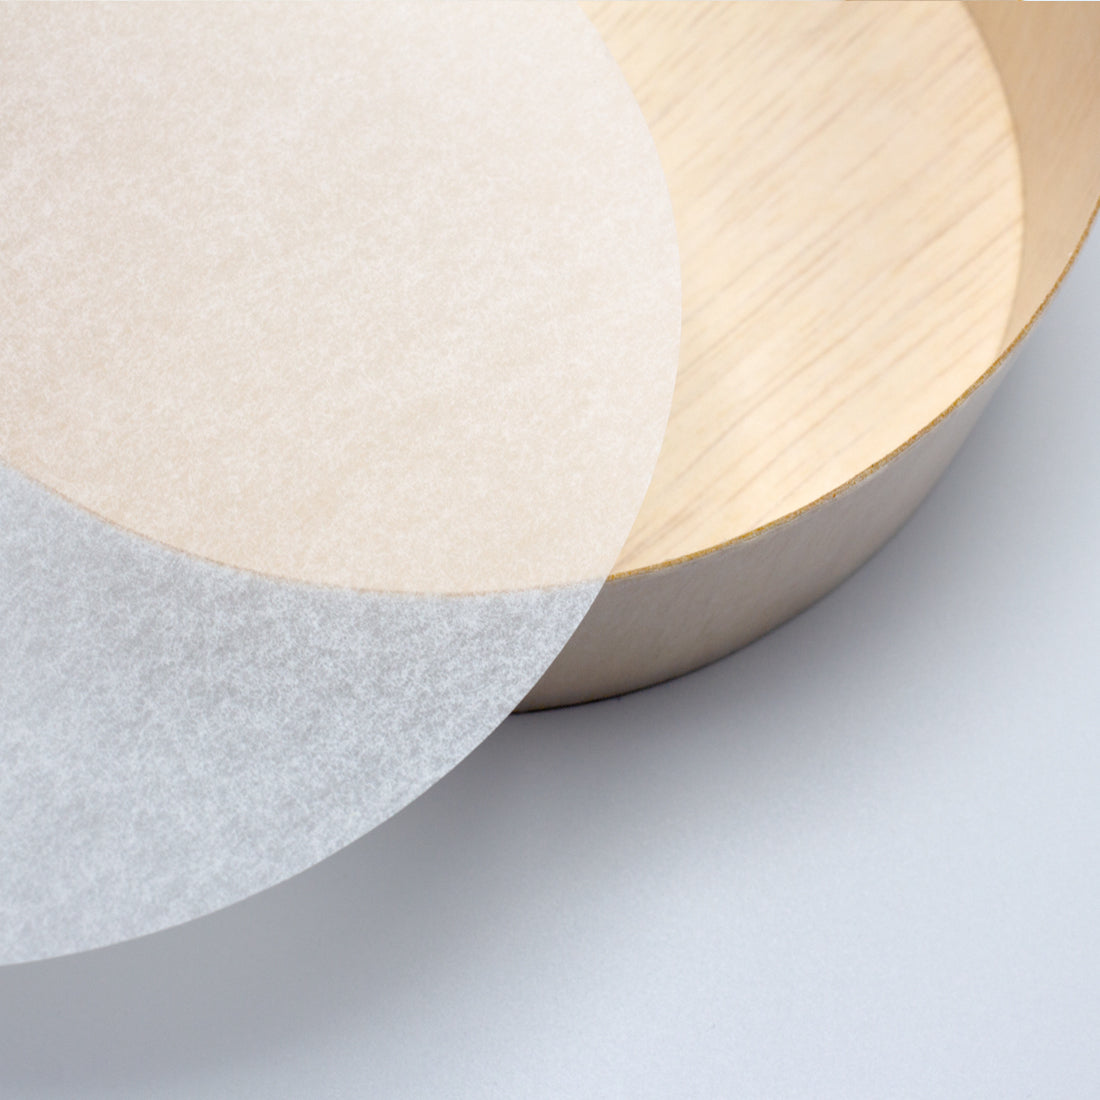 Washi feel translucent round piece of paper next to round wood container.